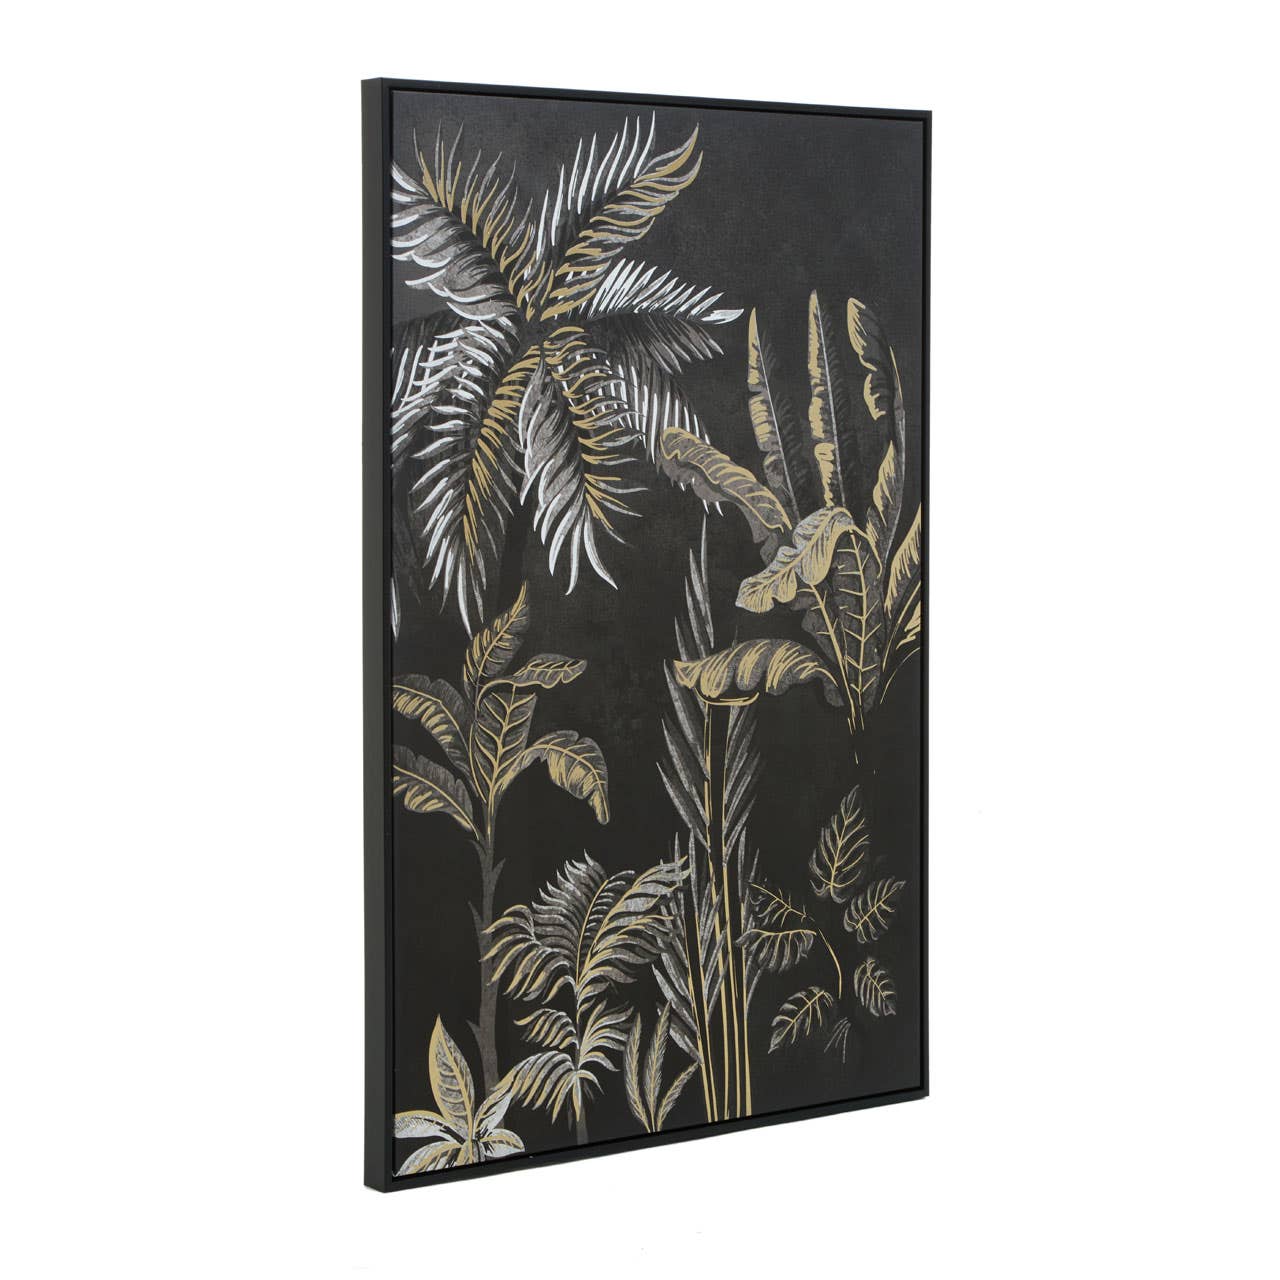 Noosa & Co. Accessories Astratto Canvas Wall Art Gold Foil House of Isabella UK